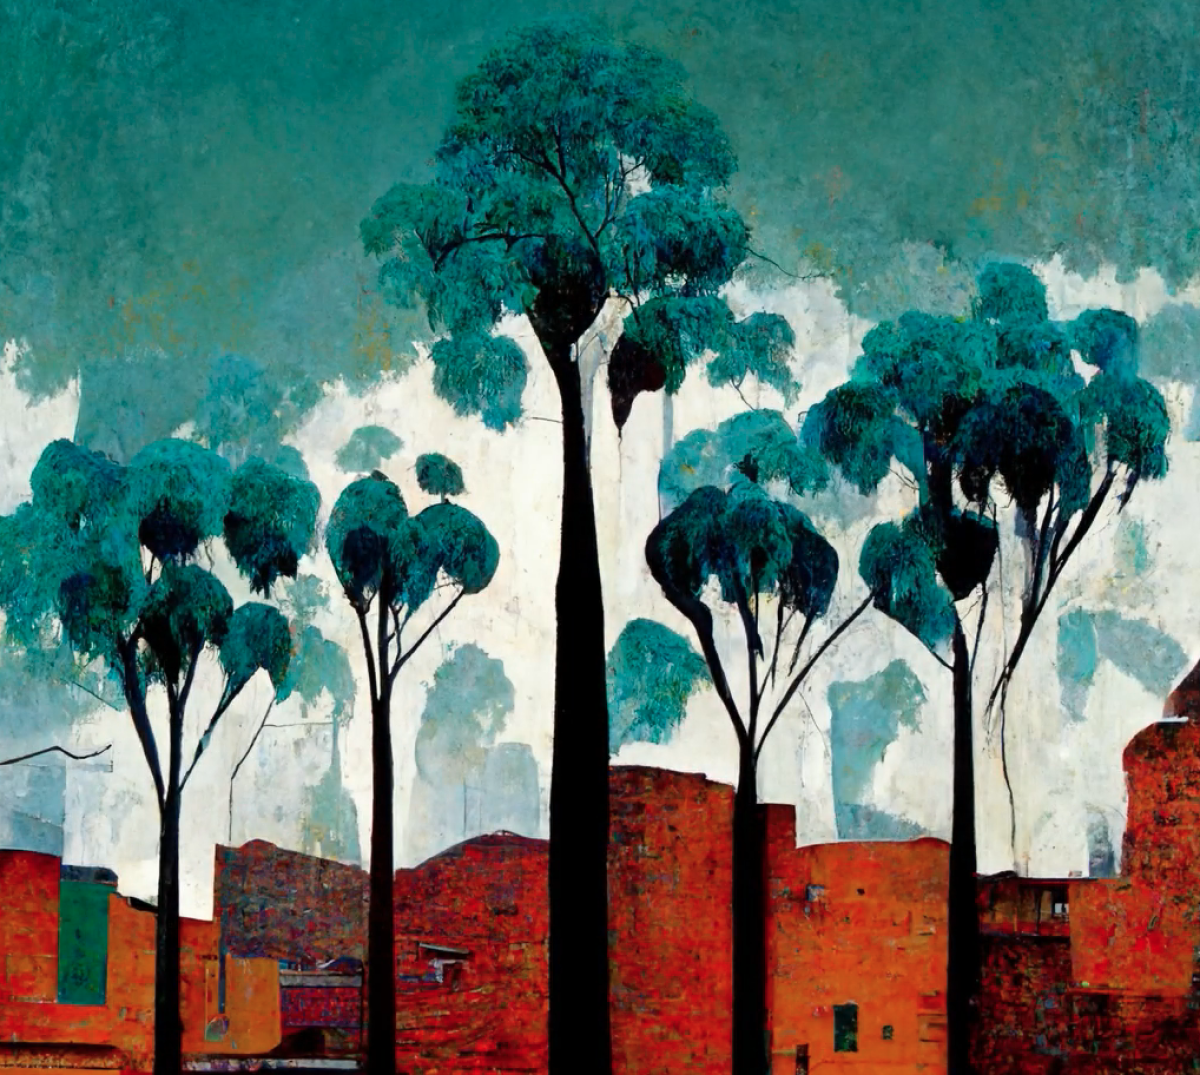 An illustration of towering green trees above a red brick city.